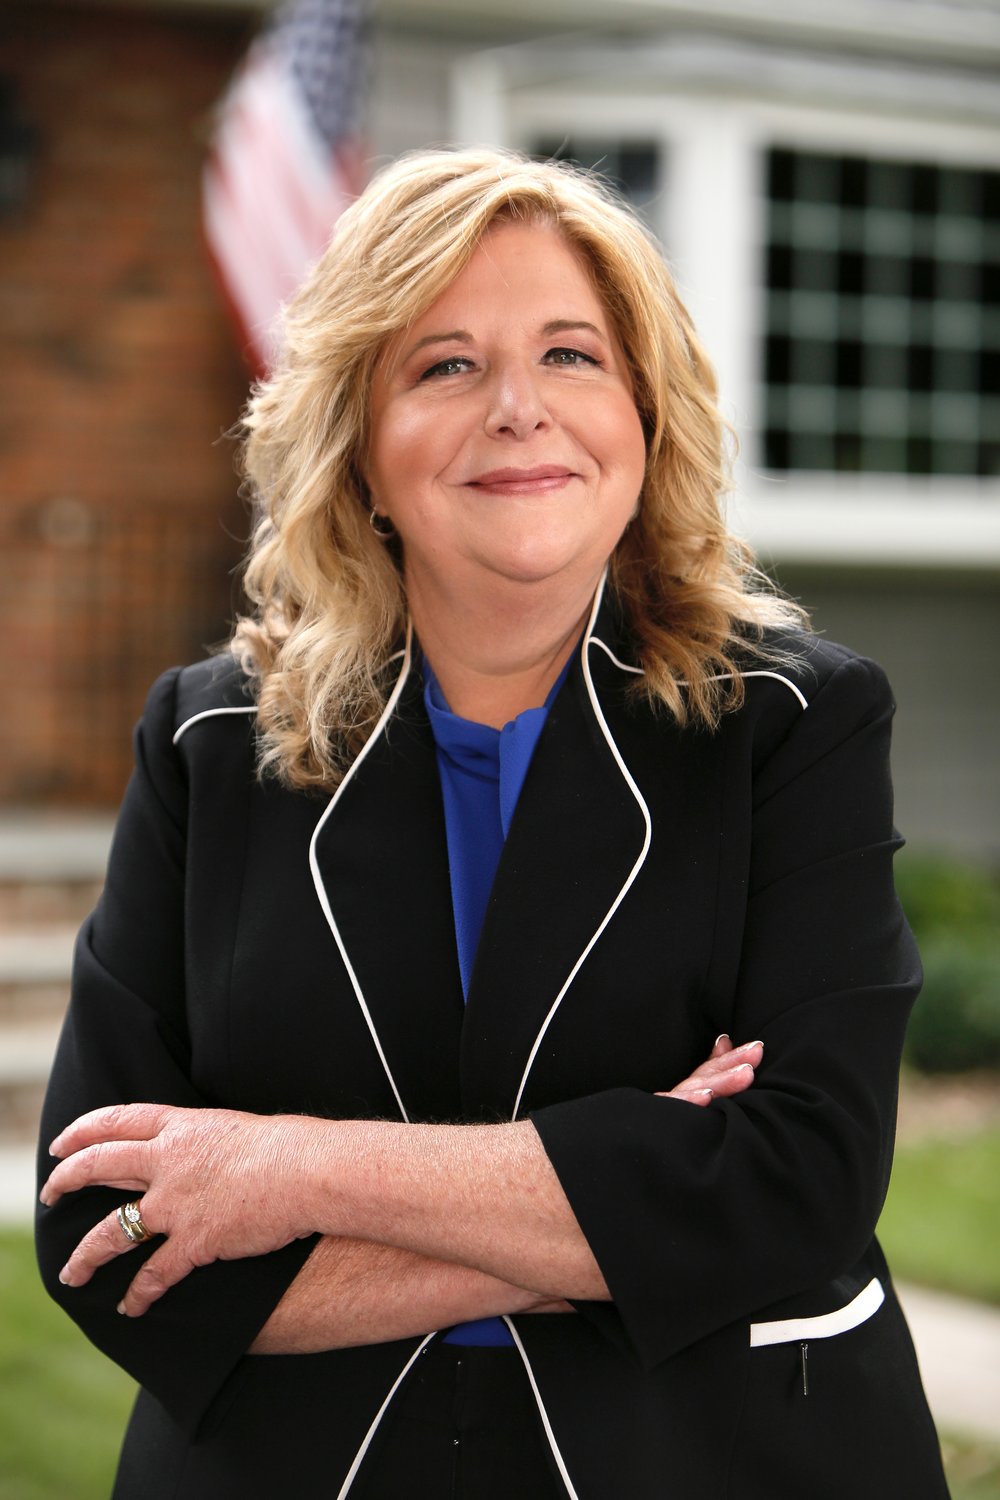 Anne Donnelly, the Republican candidate.